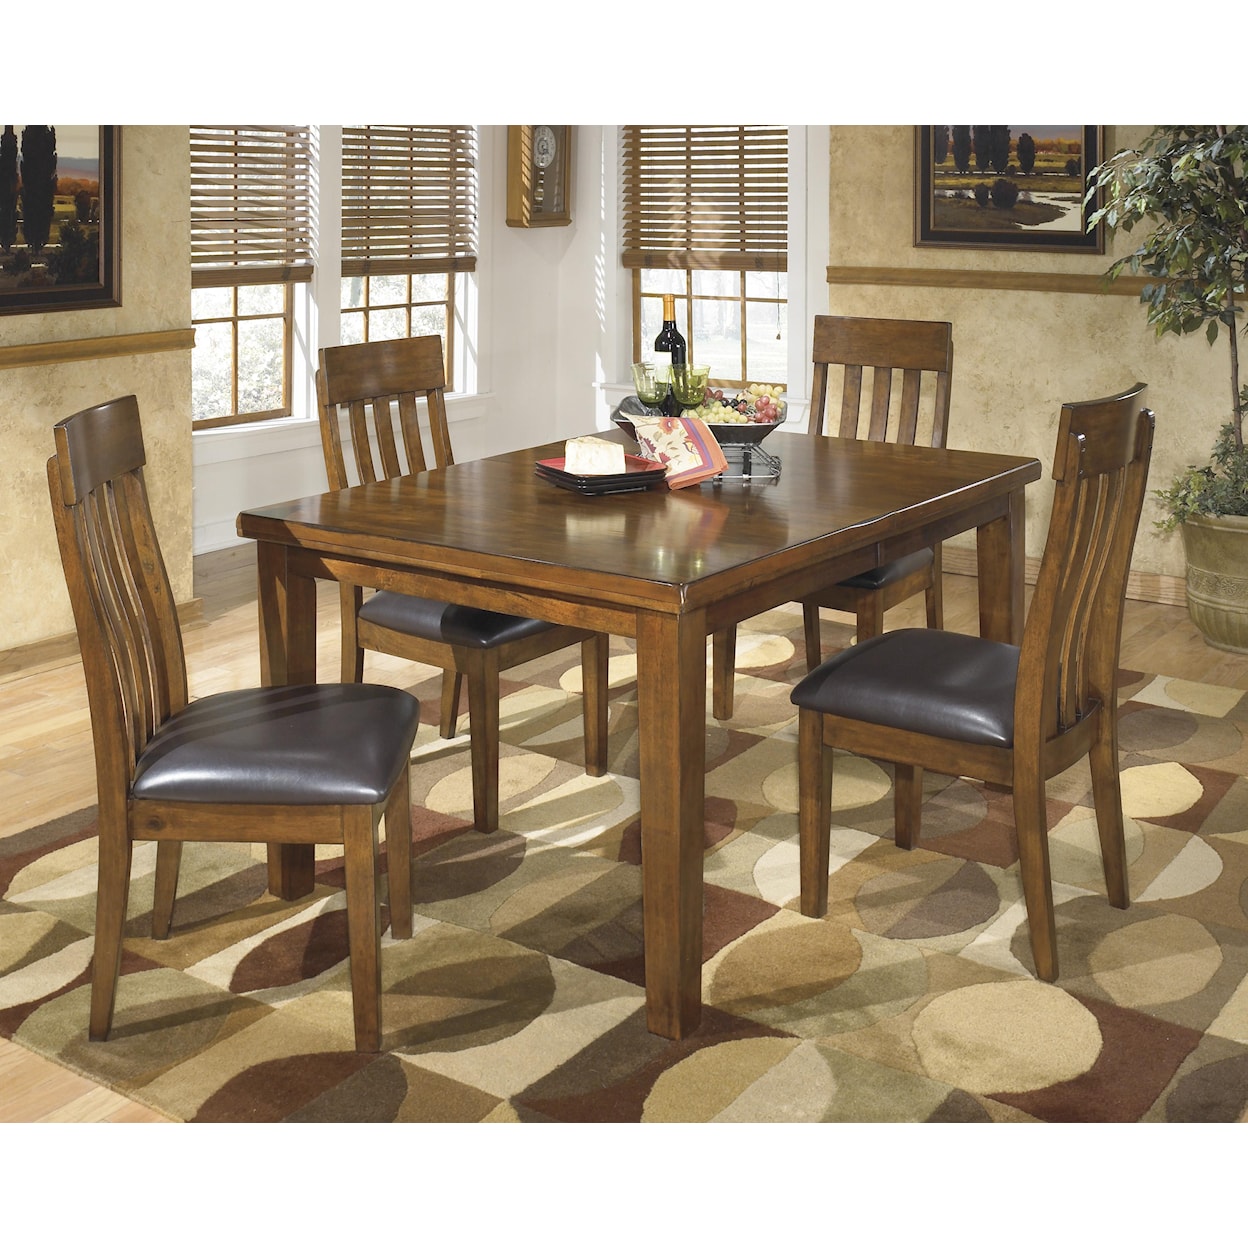 Signature Design by Ashley Ralene 5 Pc Dining Group